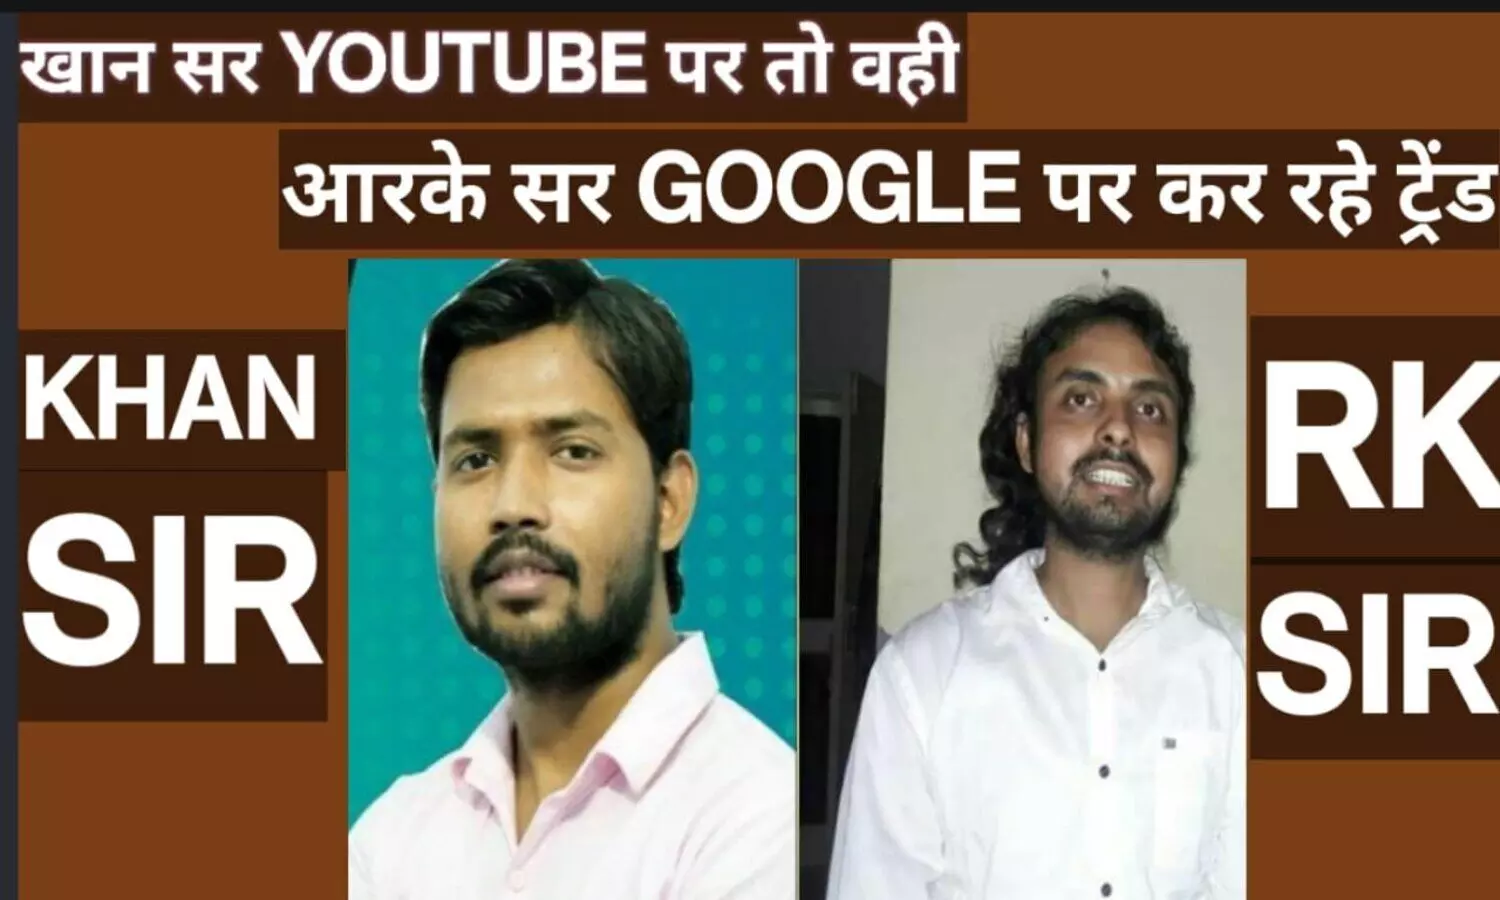 Bihar News: Khan Sir trends on YouTube while RK Srivastava is trending on Google; know reason here